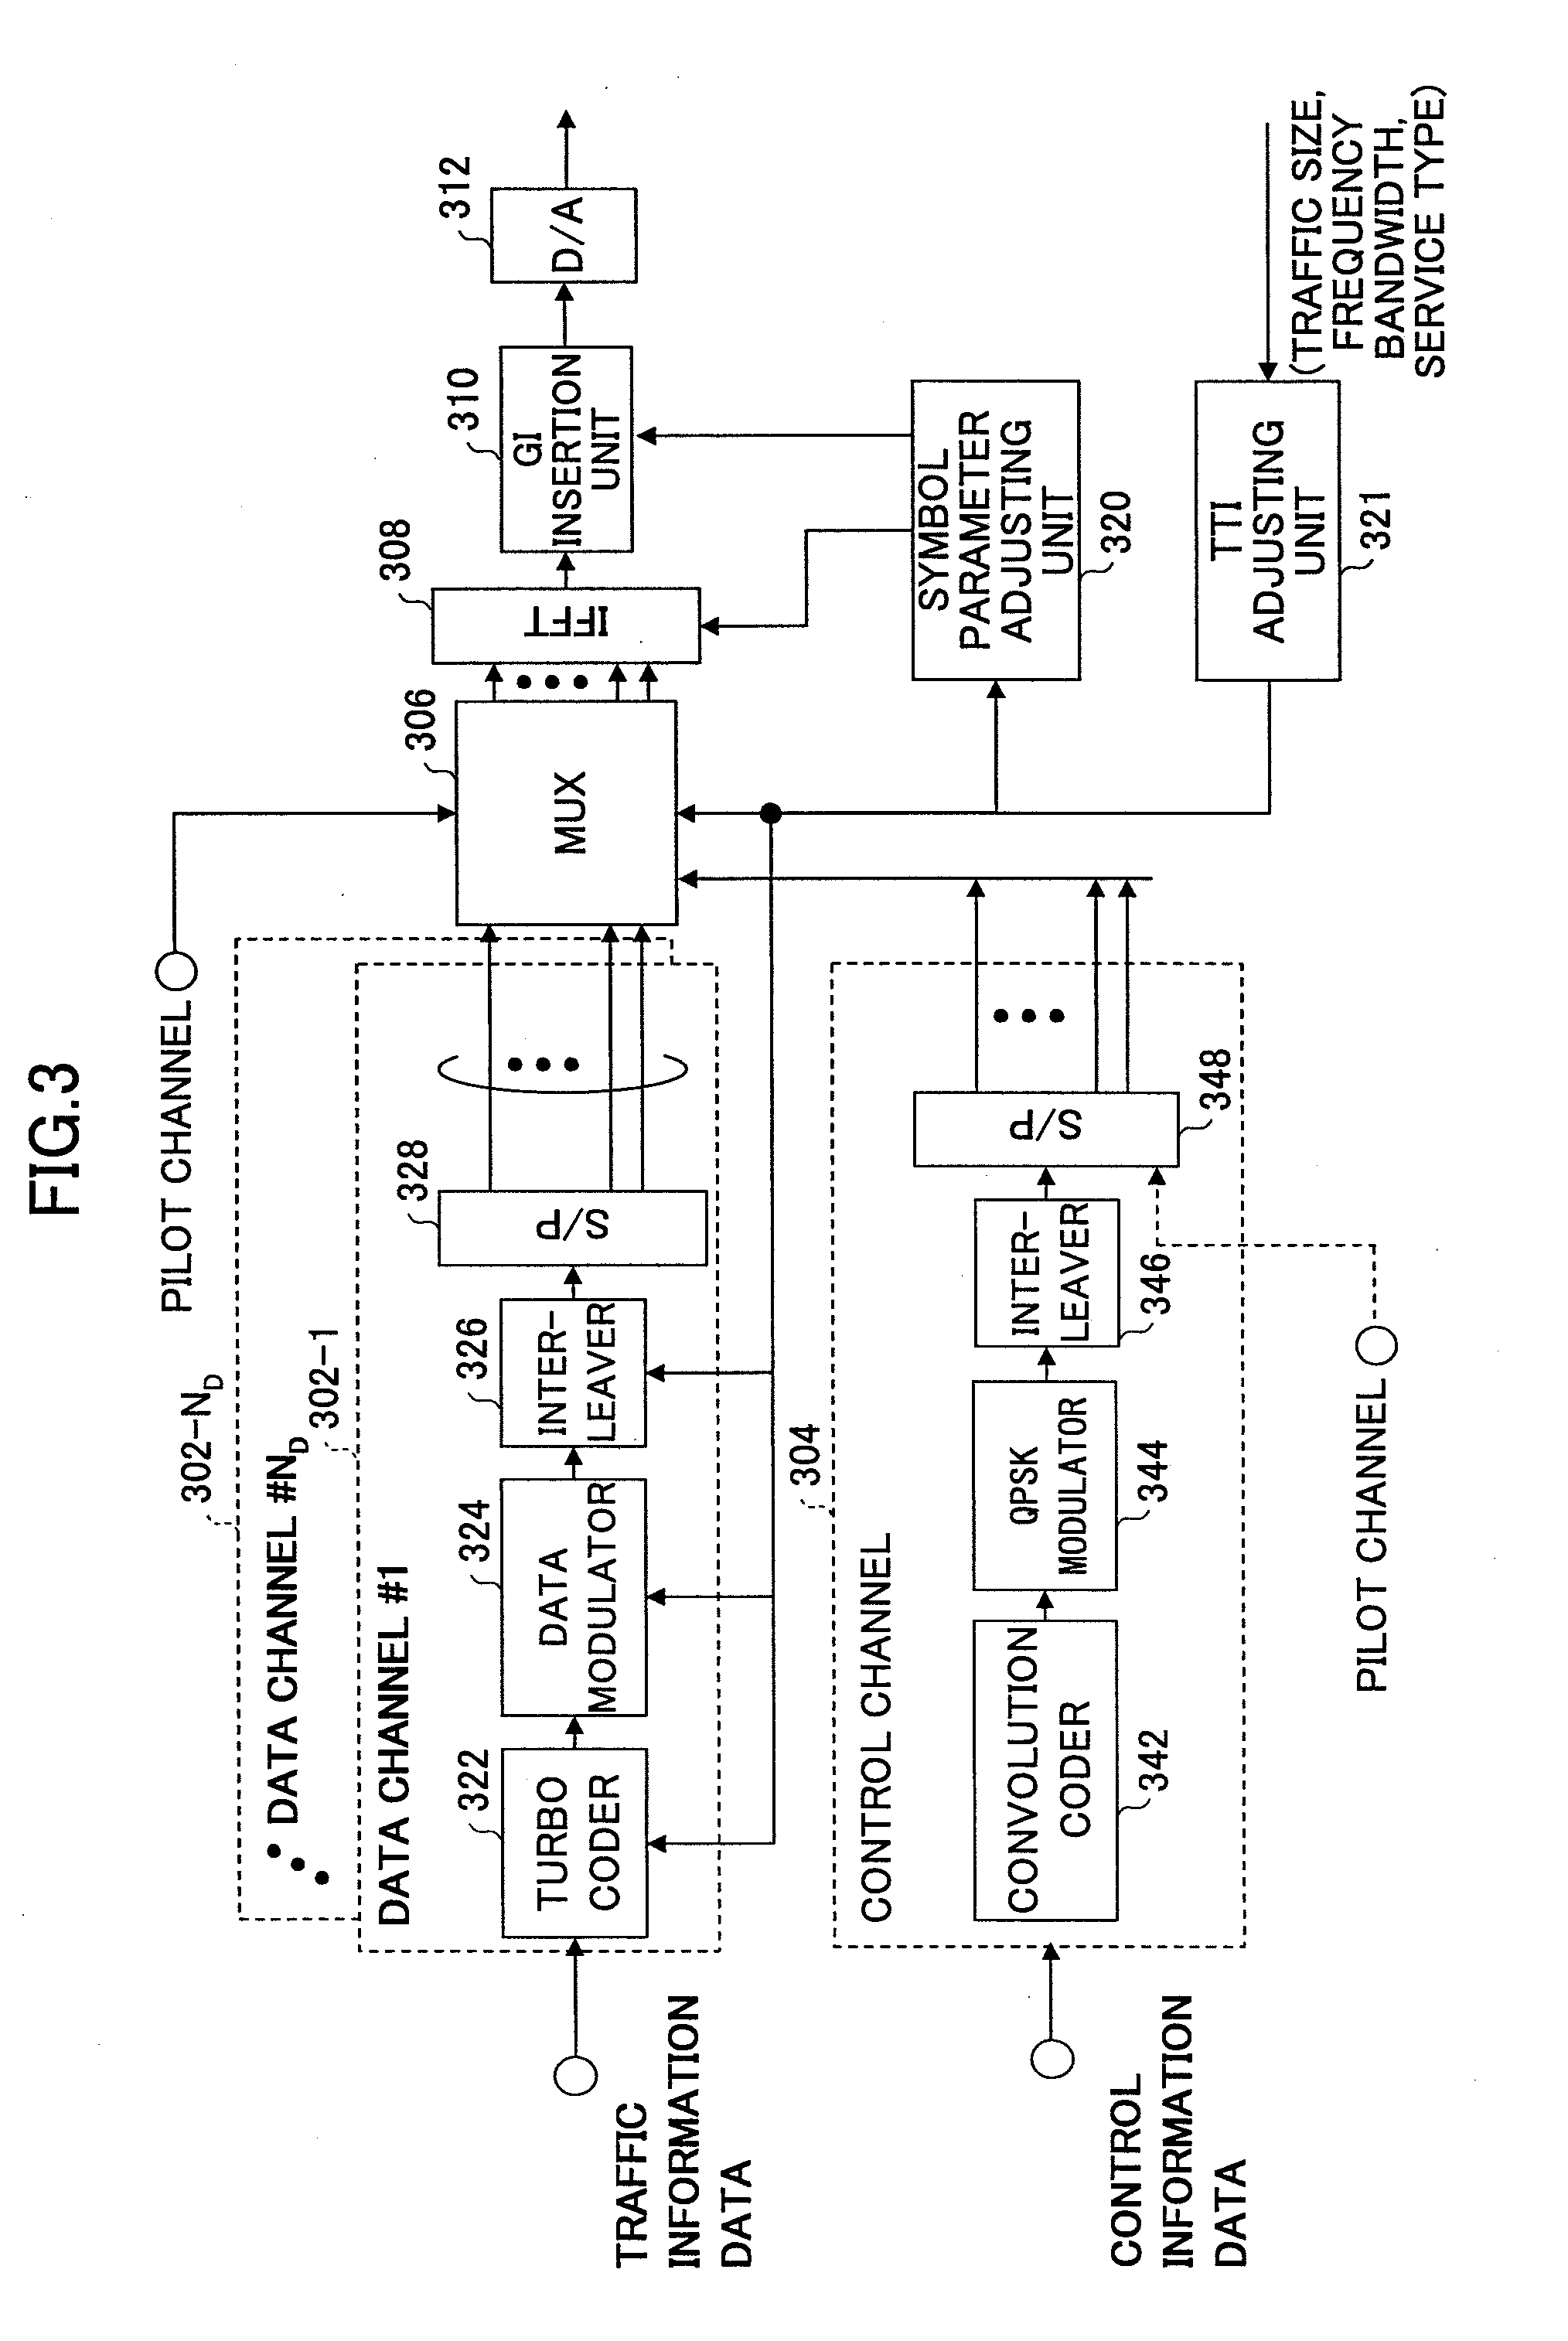 Apparatus for generating a set of radio parameters, a transmitter and a receiver